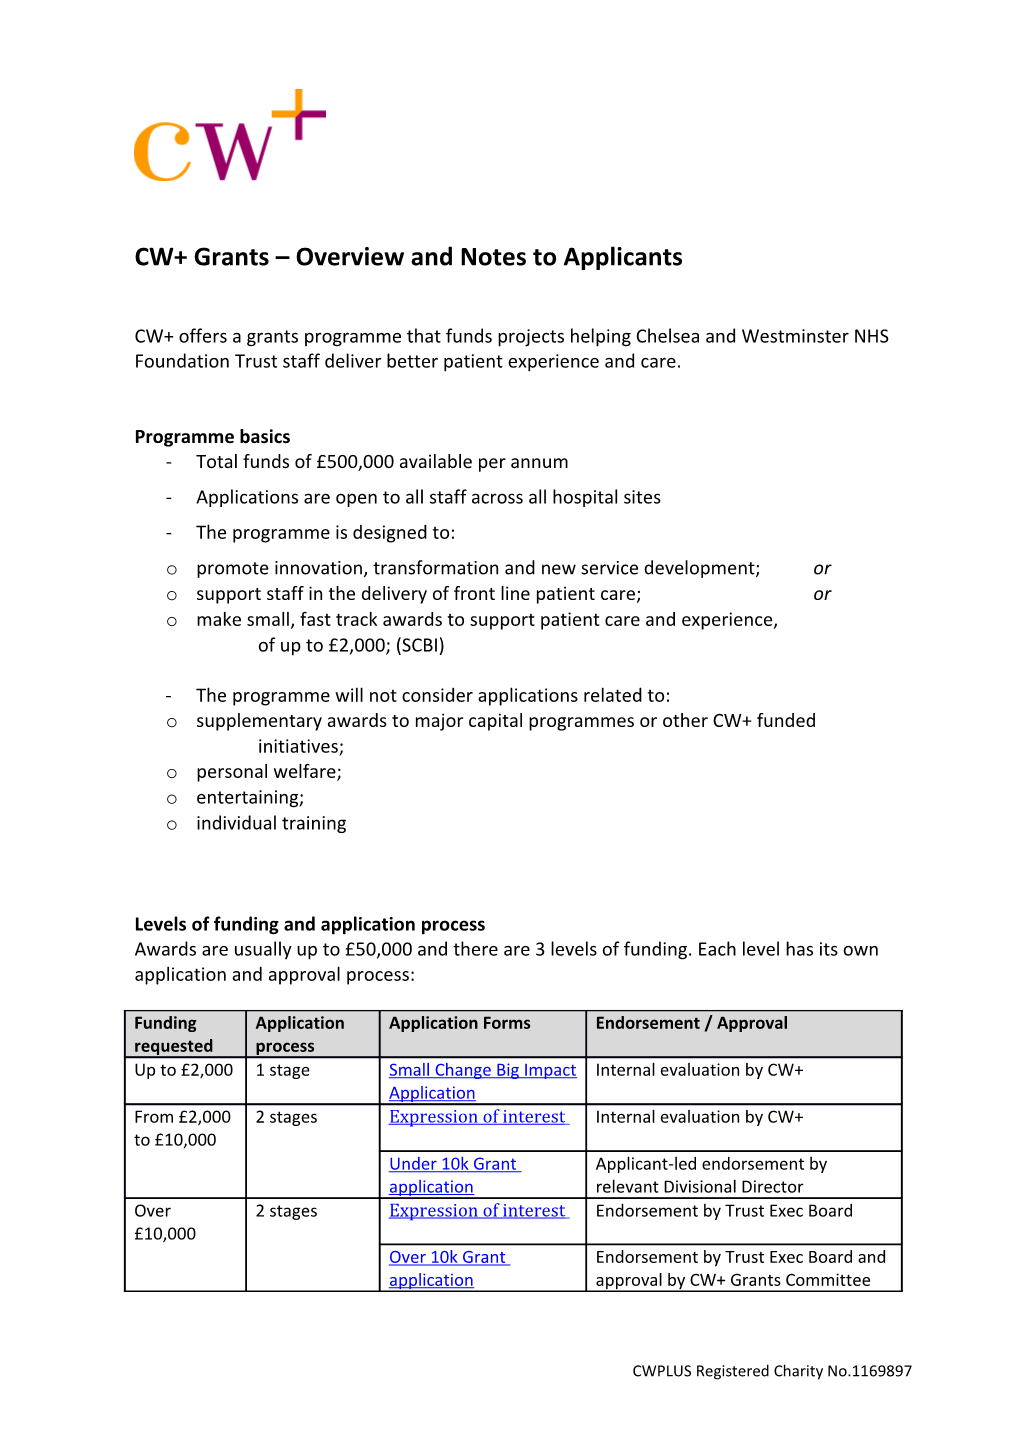 CW+ Grants Overview and Notes to Applicants